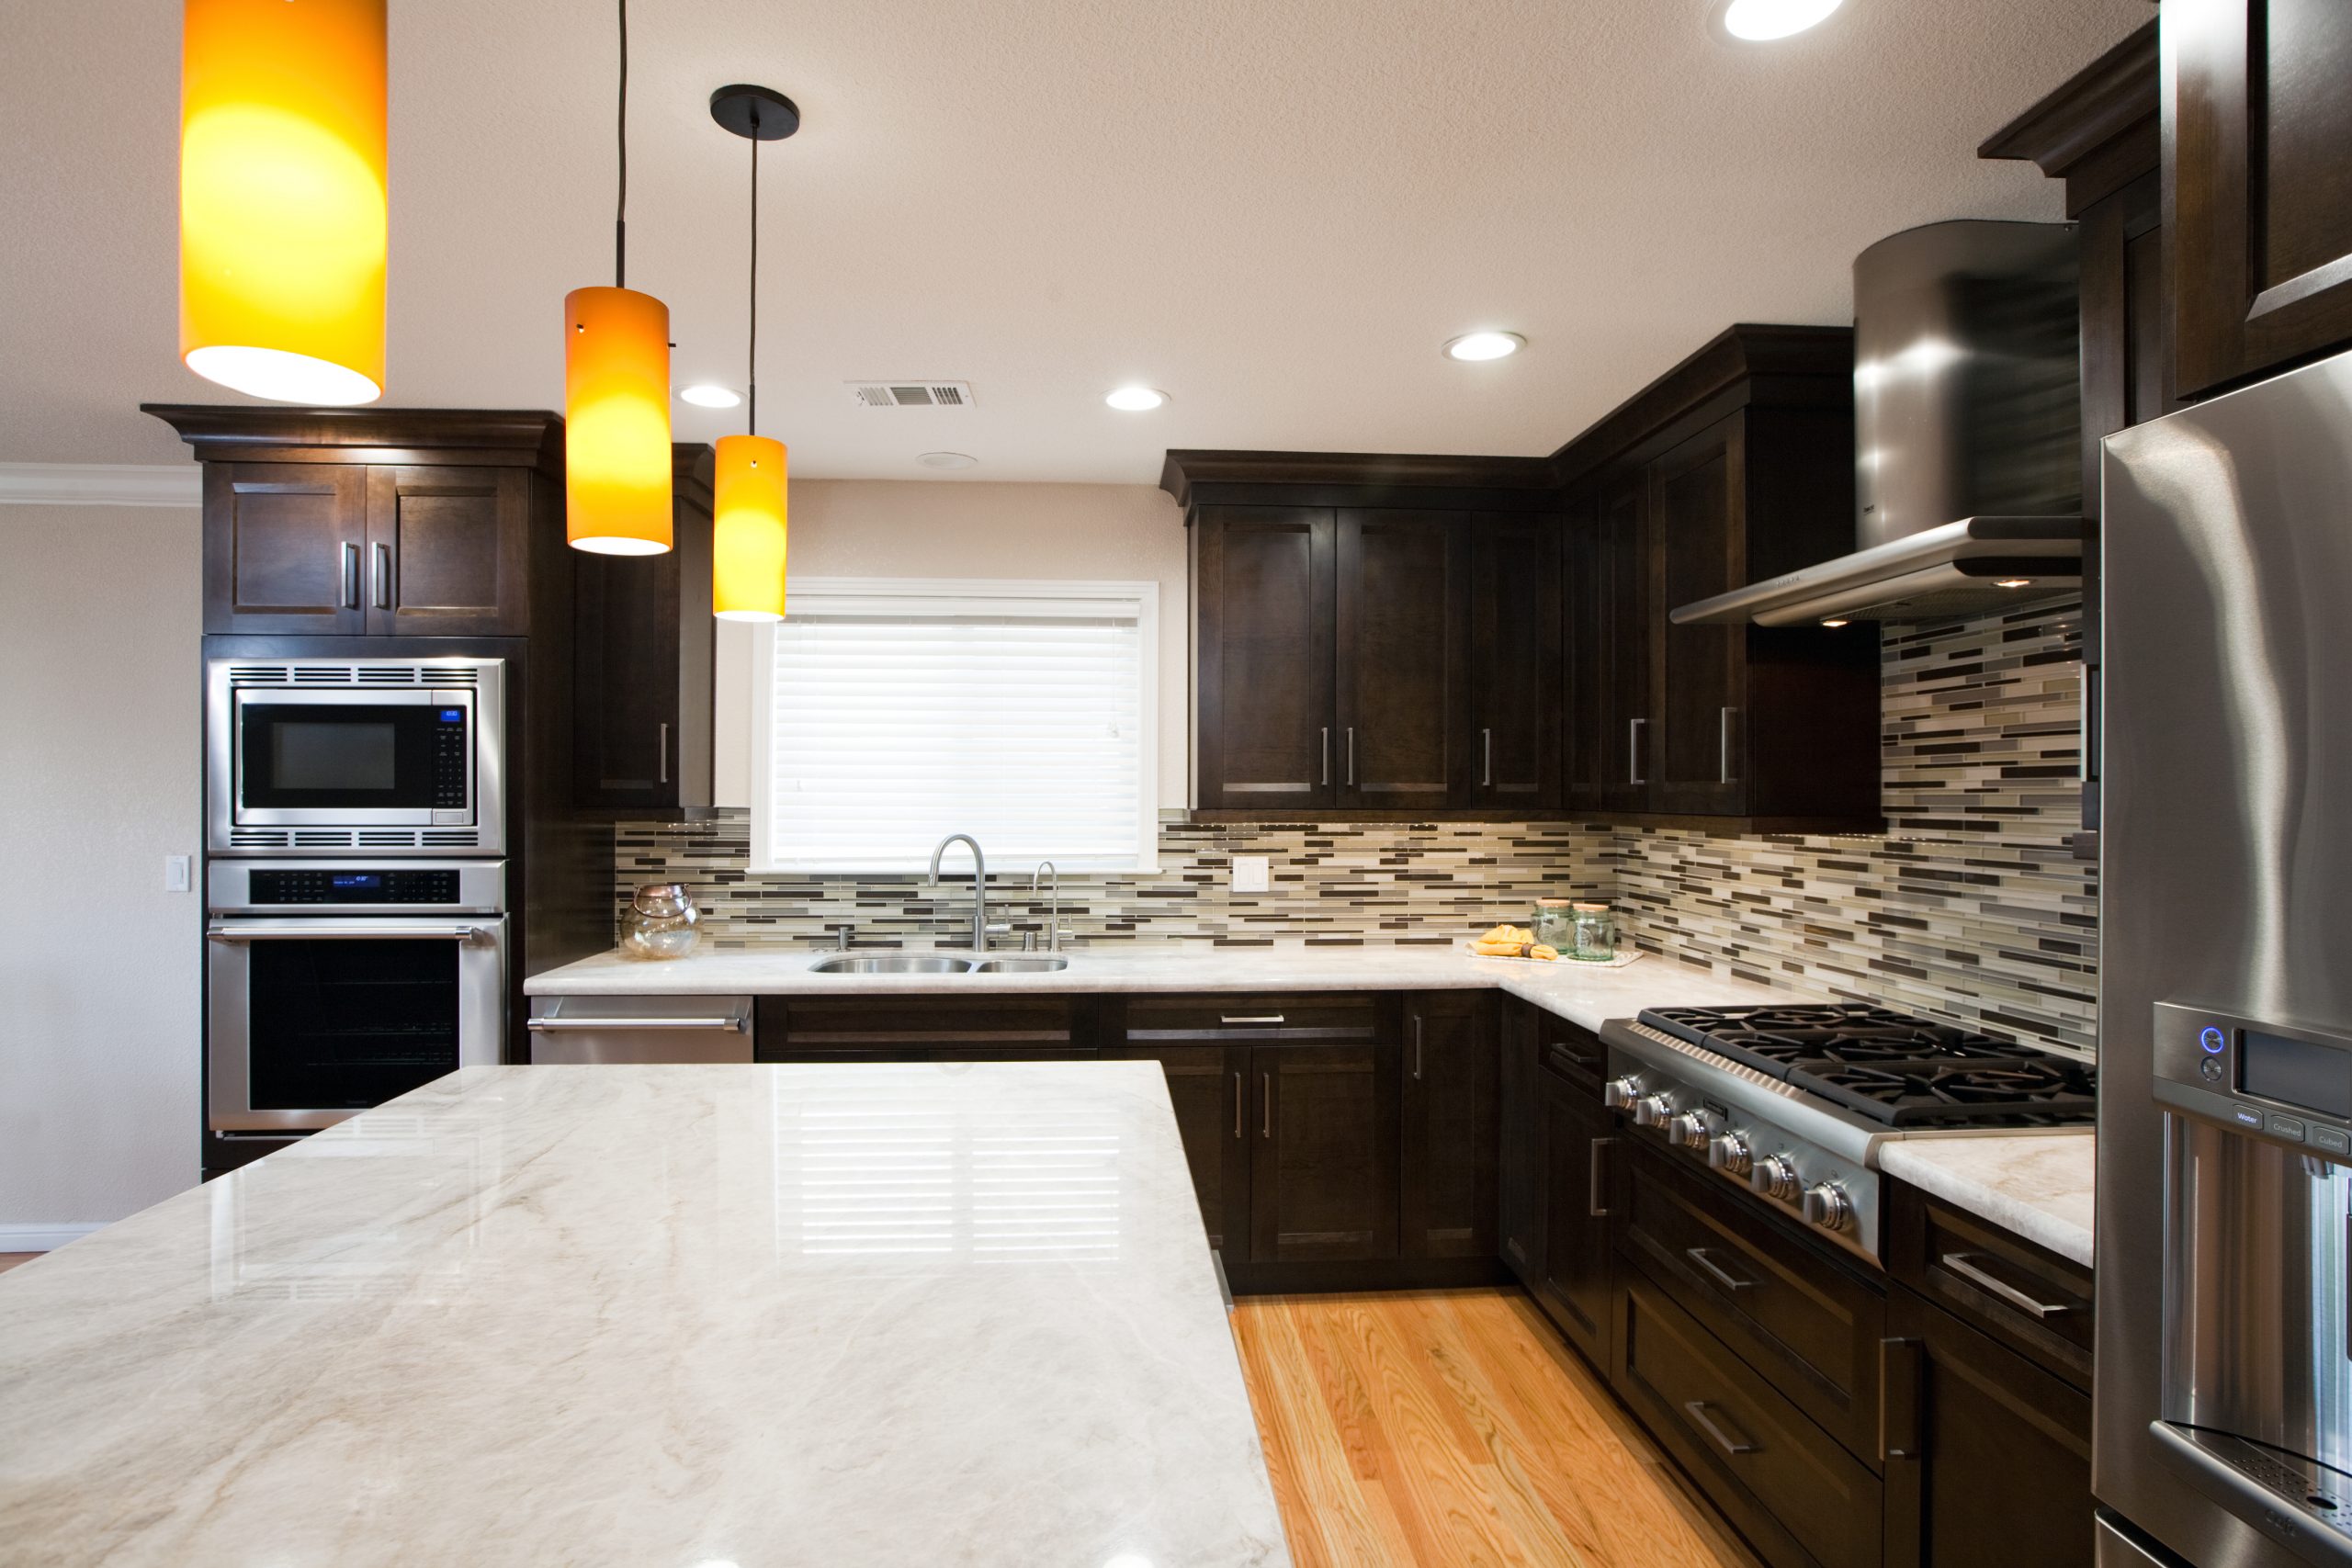 A modern kitchen with stainless steel appliances, tile back splash, and granite counter tops.